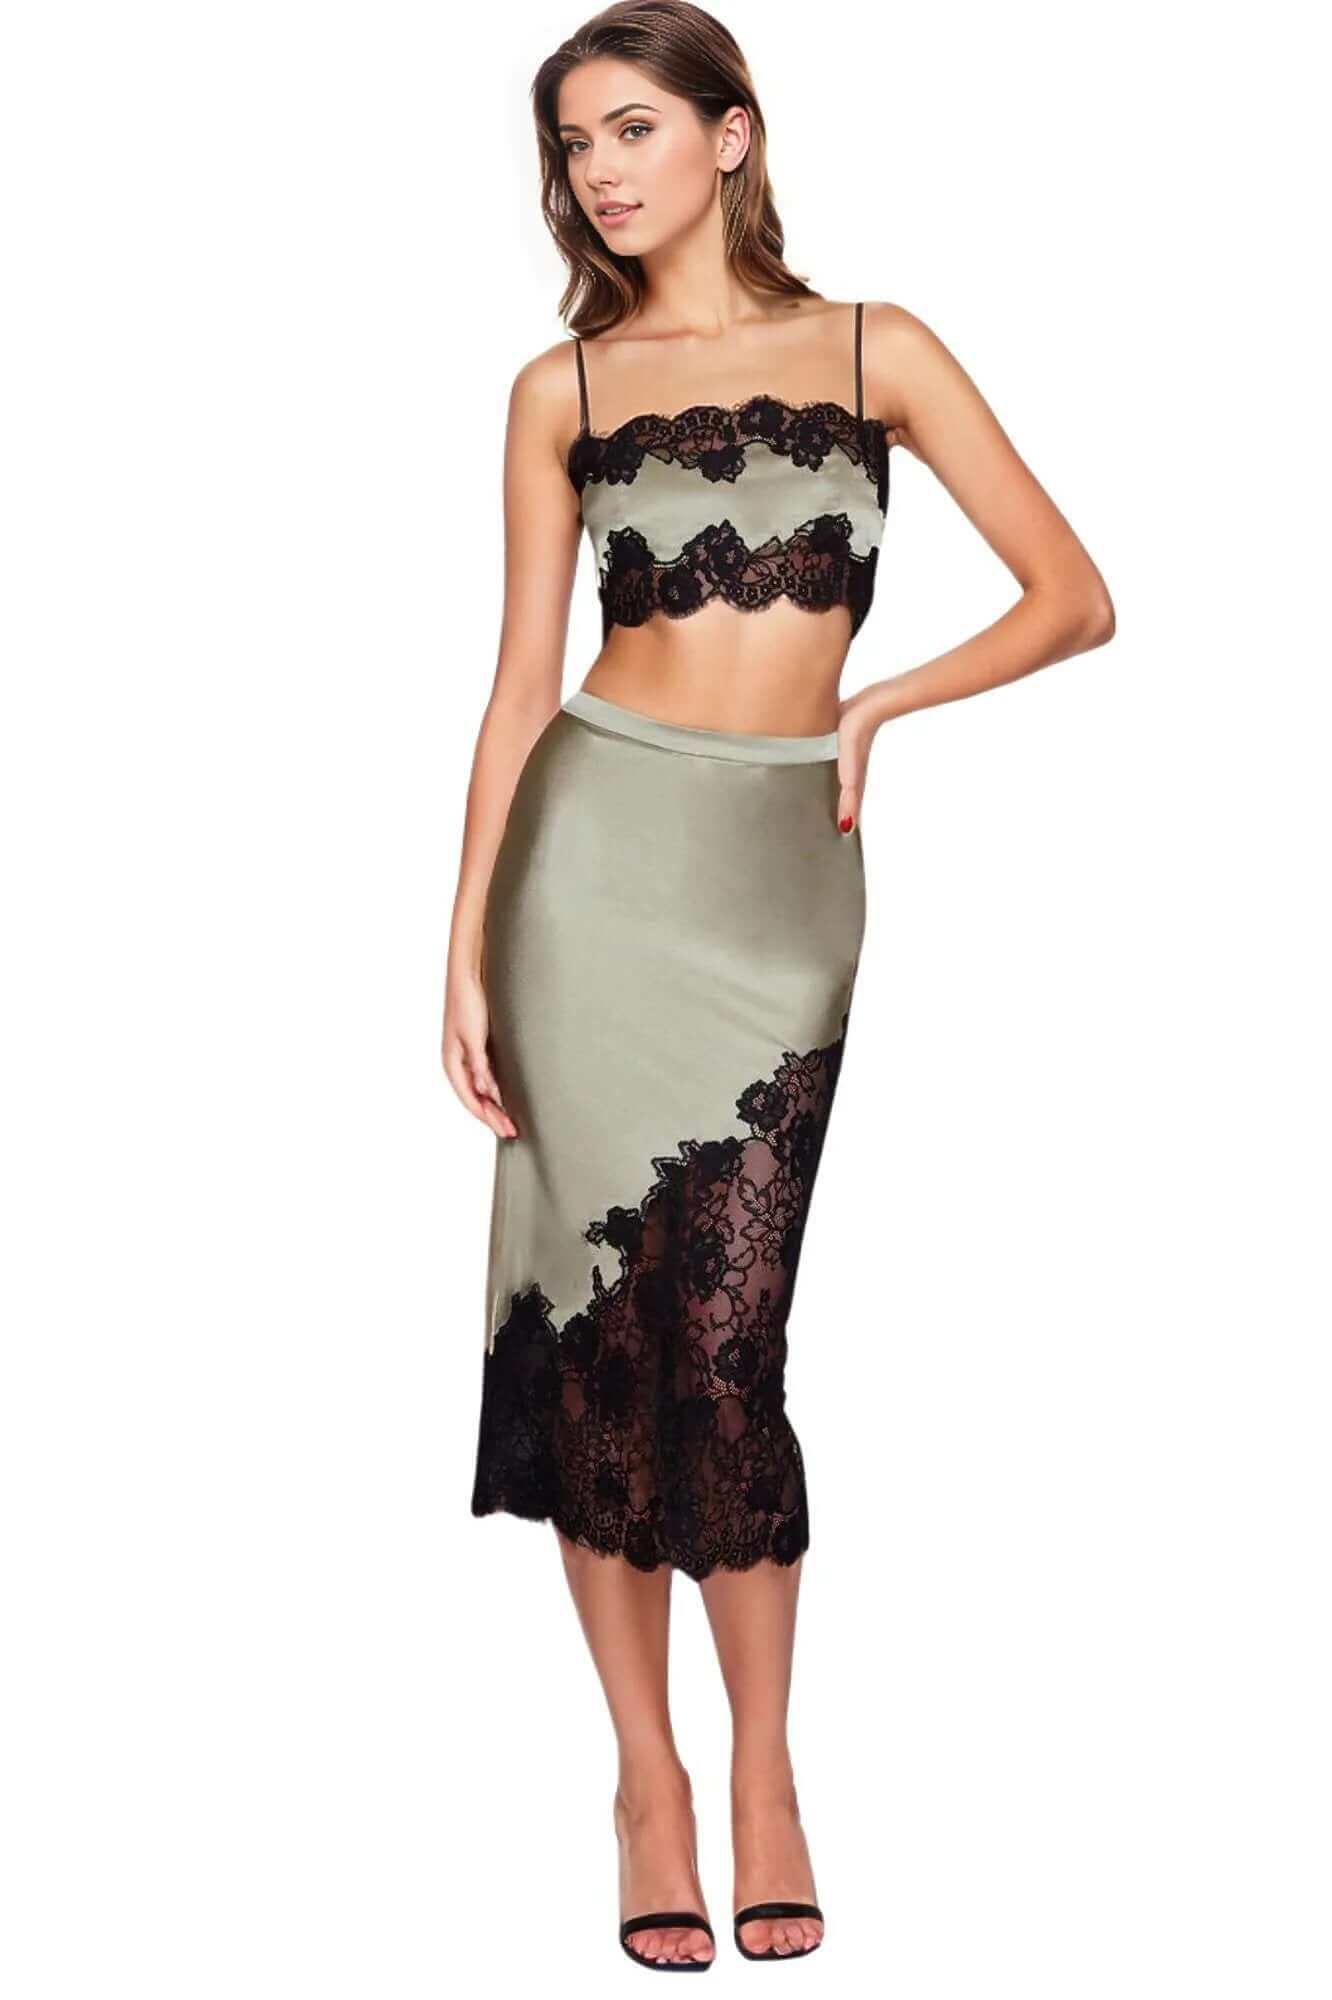 Silk and Lace Scallop Midi Skirt in Olive Green